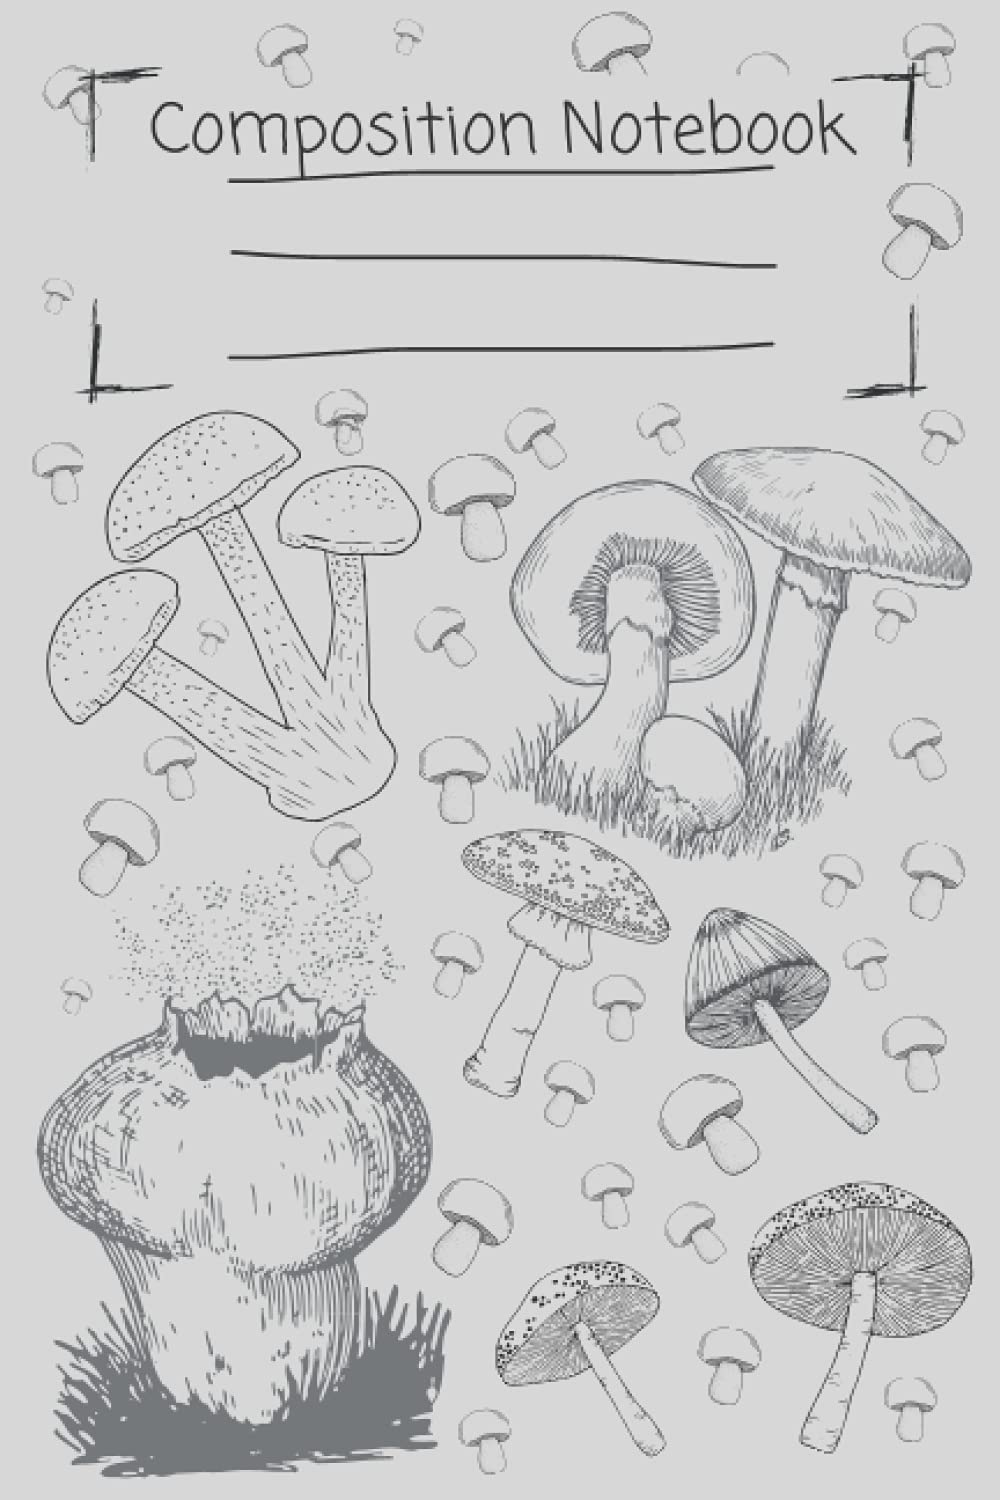 Mushroom journal notebook cottagecore: Perfect gift for plants, fungi foraging, nature lovers, foragers, students and biologists lined notepad